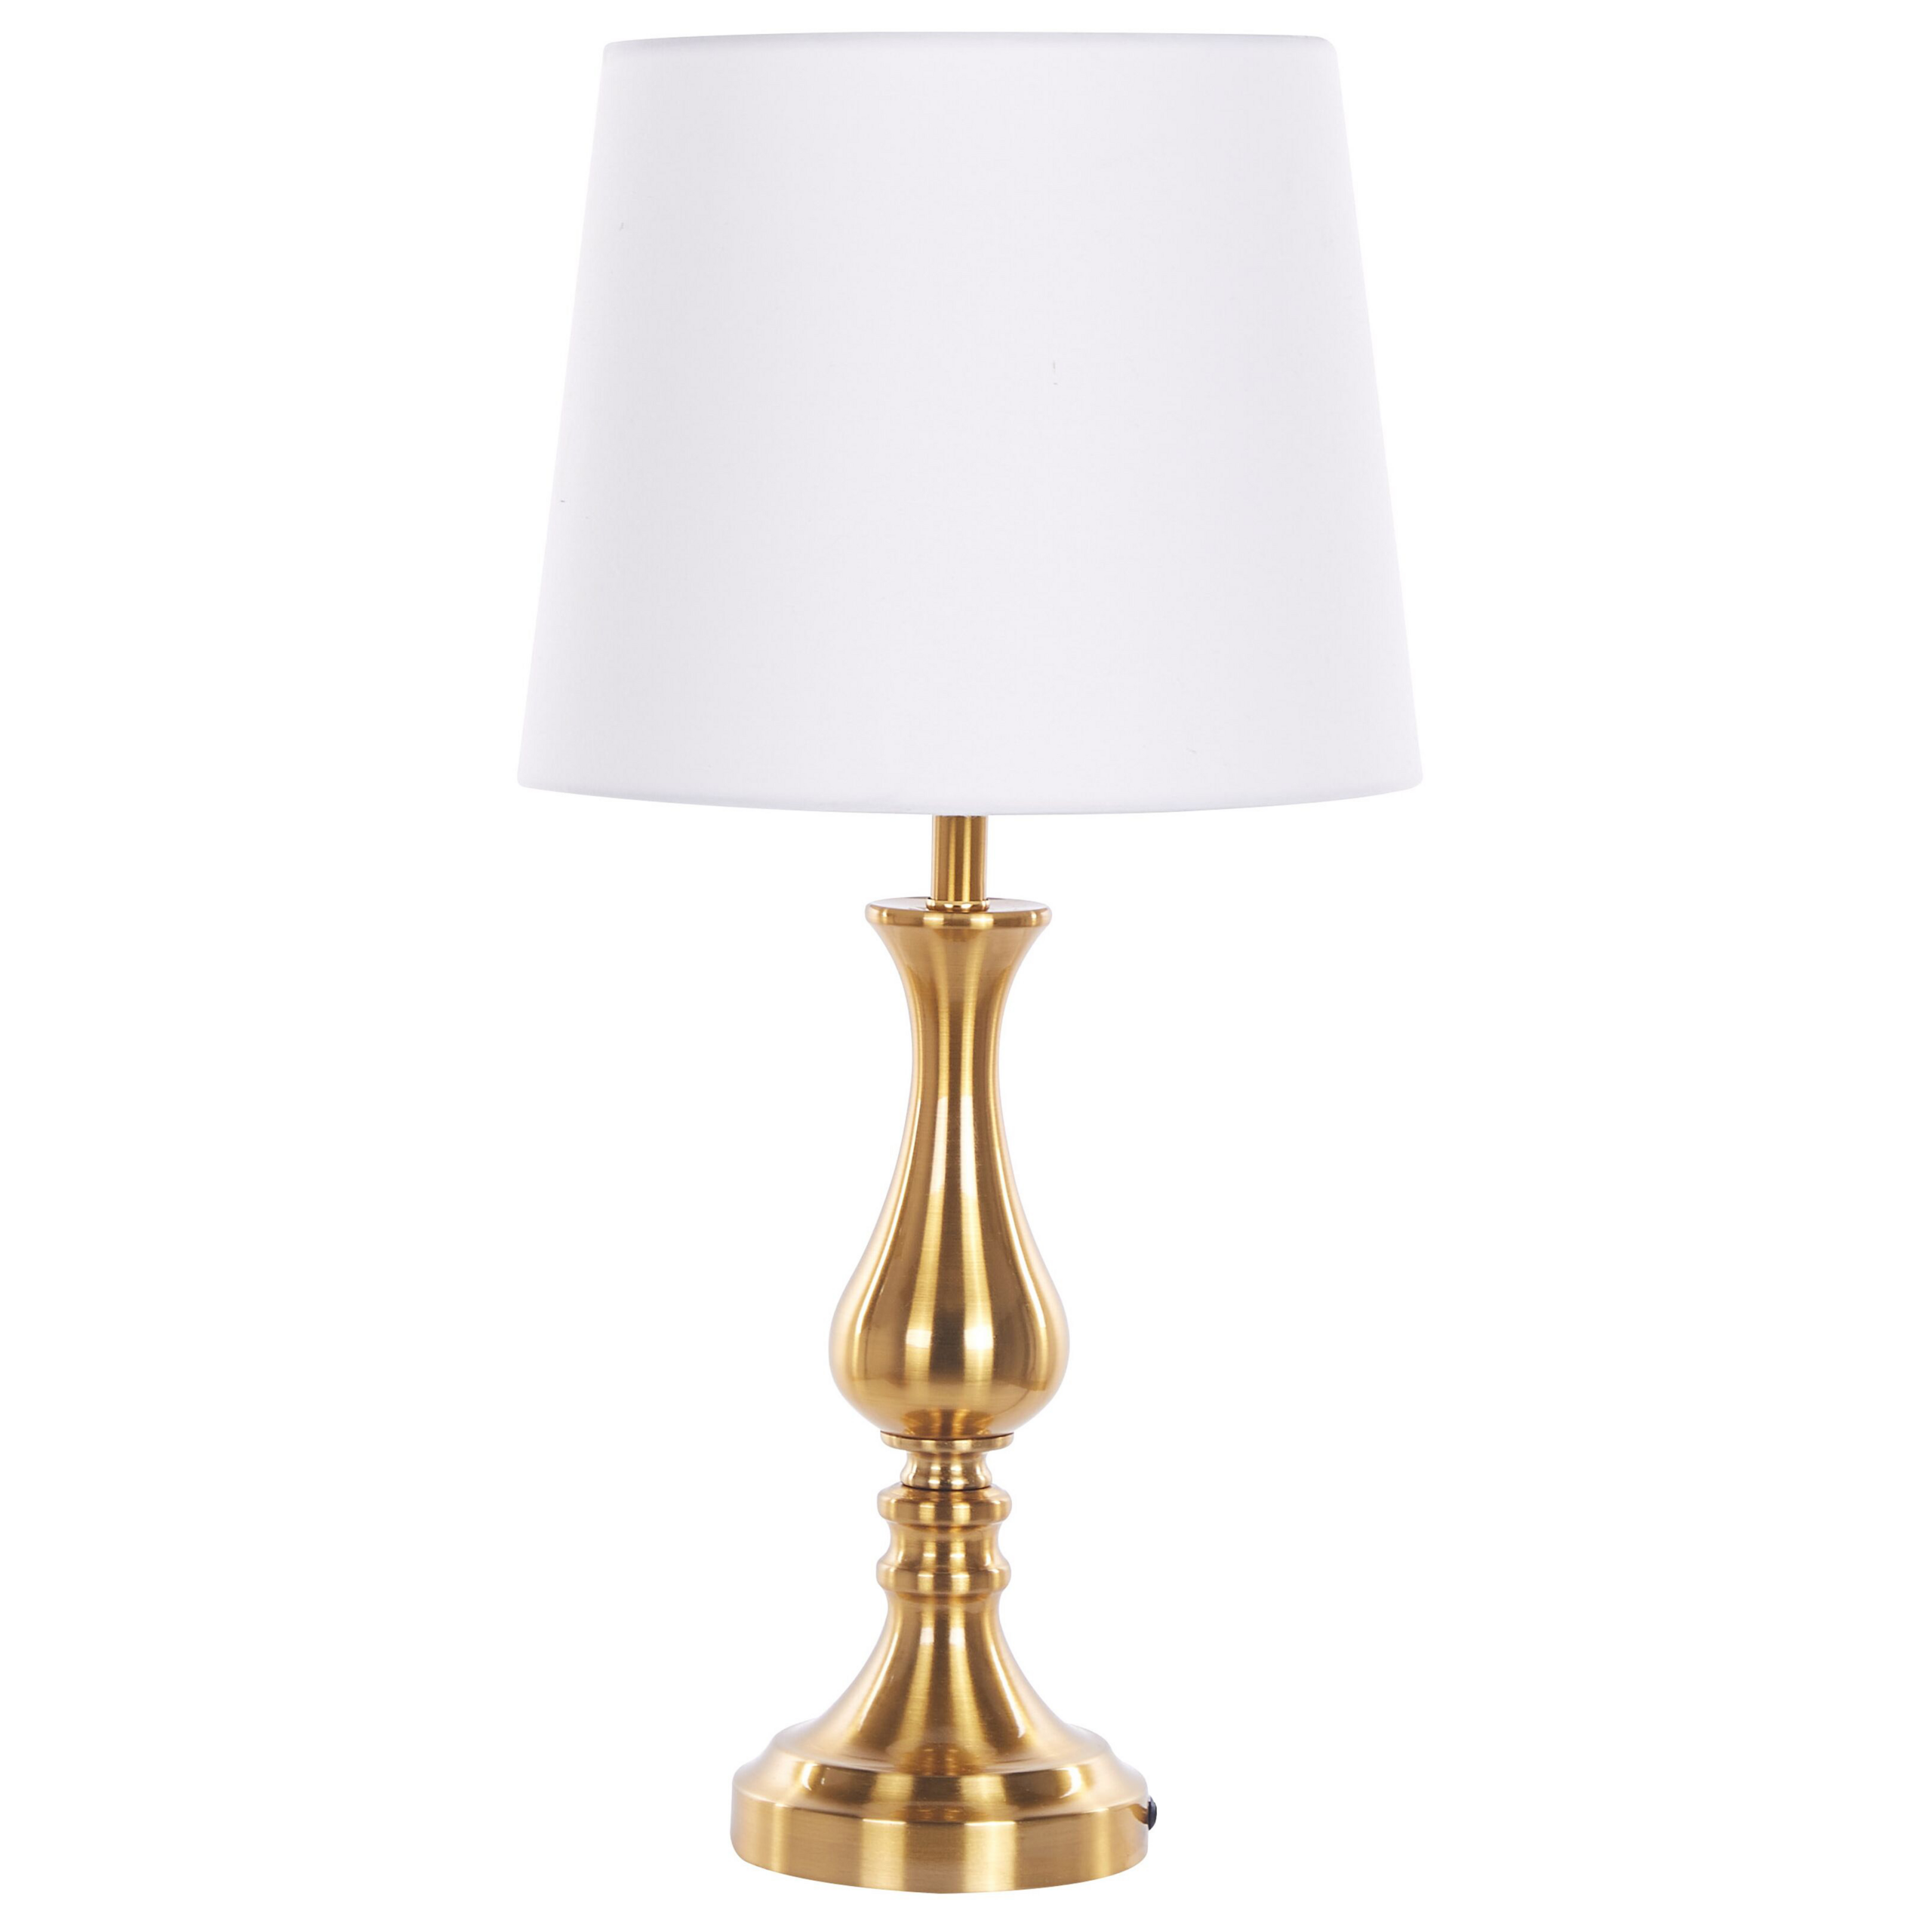 Beliani Table Lamp Gold with White Metal Base Polyester Shade Vintage Design